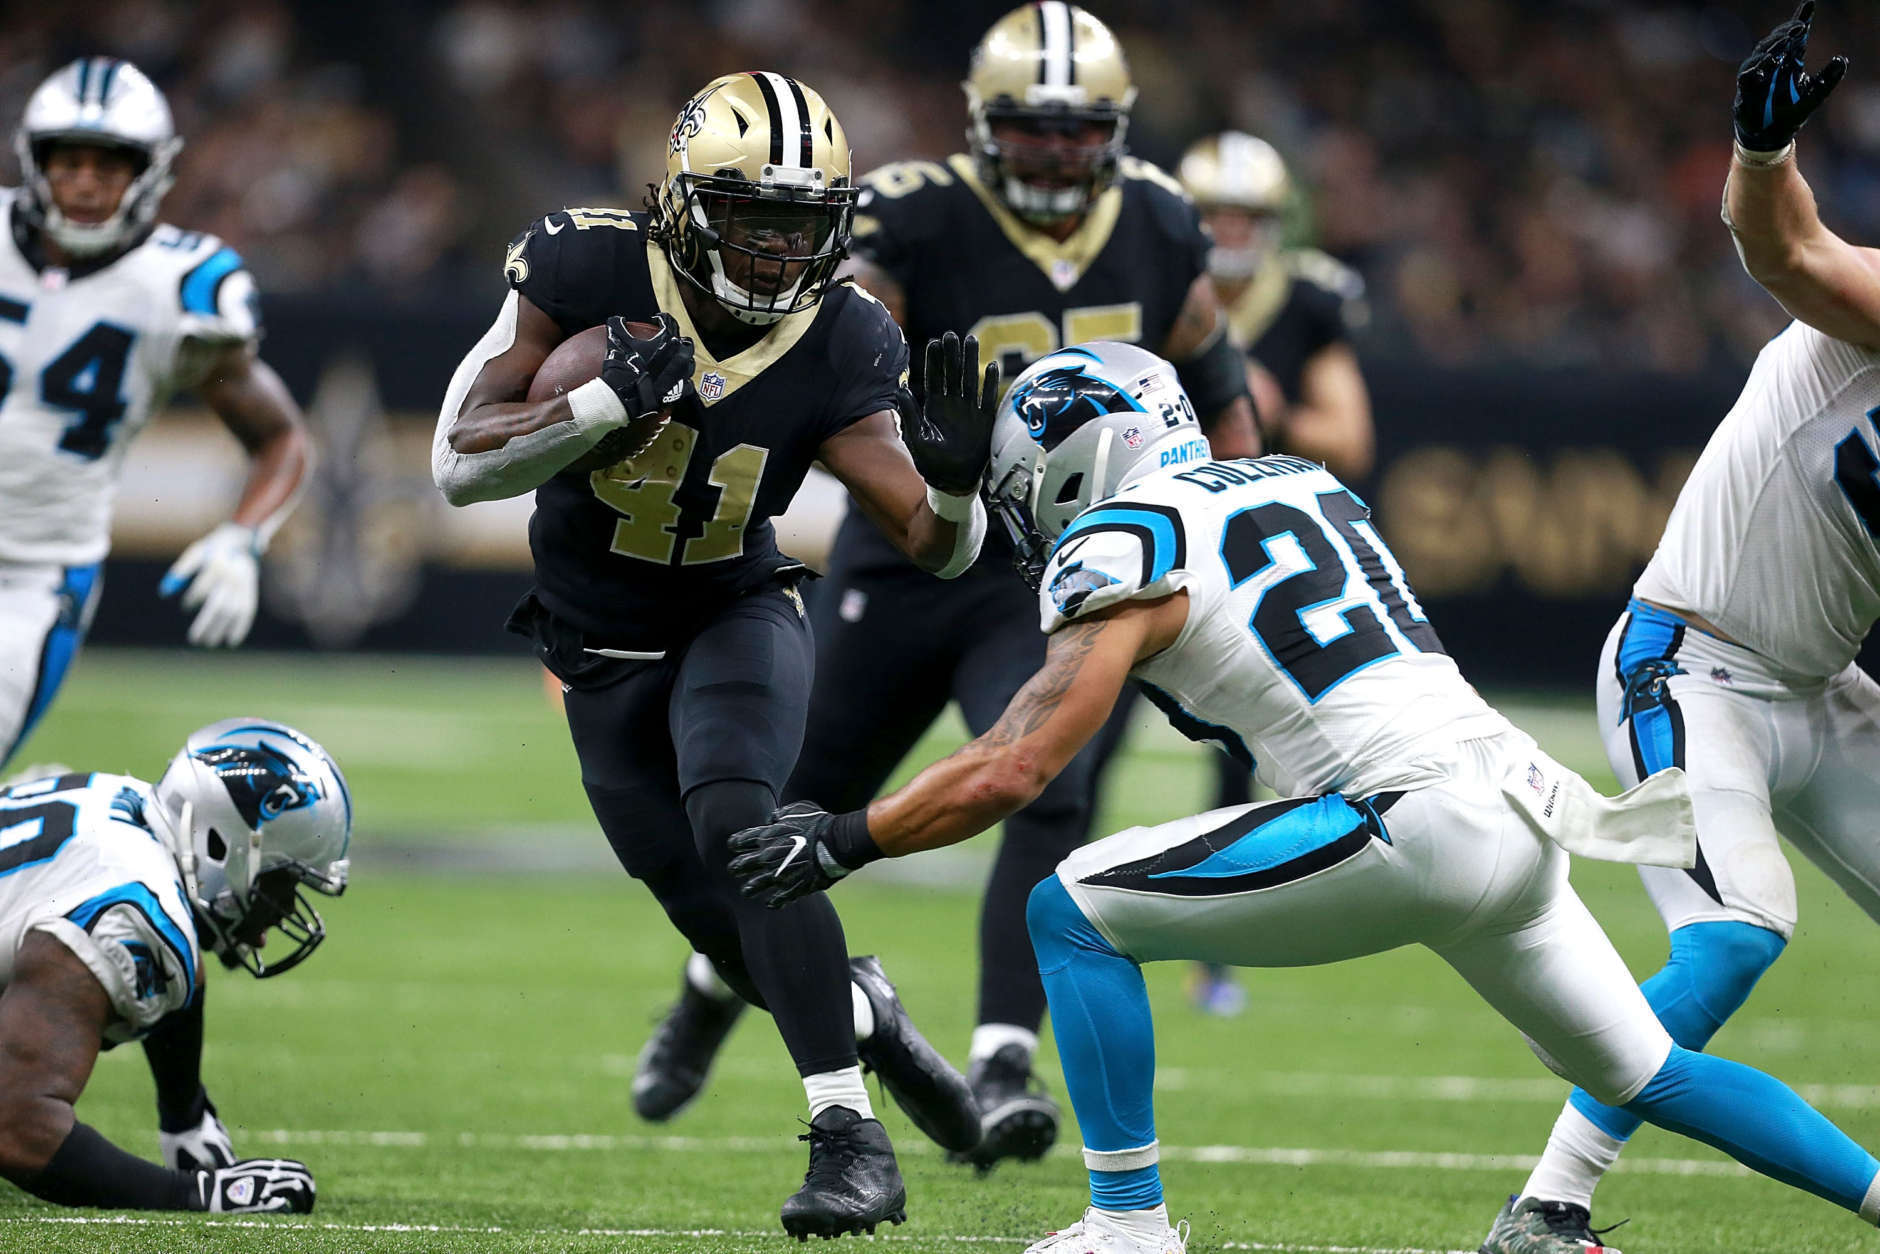 NEW ORLEANS, LA - DECEMBER 03:  Alvin Kamara #41 of the New Orleans Saints runs the ball against the Carolina Panthers during the second half of a NFL game at the Mercedes-Benz Superdome on December 3, 2017 in New Orleans, Louisiana. The New Orleans Saints won the game 31 - 21.  (Photo by Sean Gardner/Getty Images)